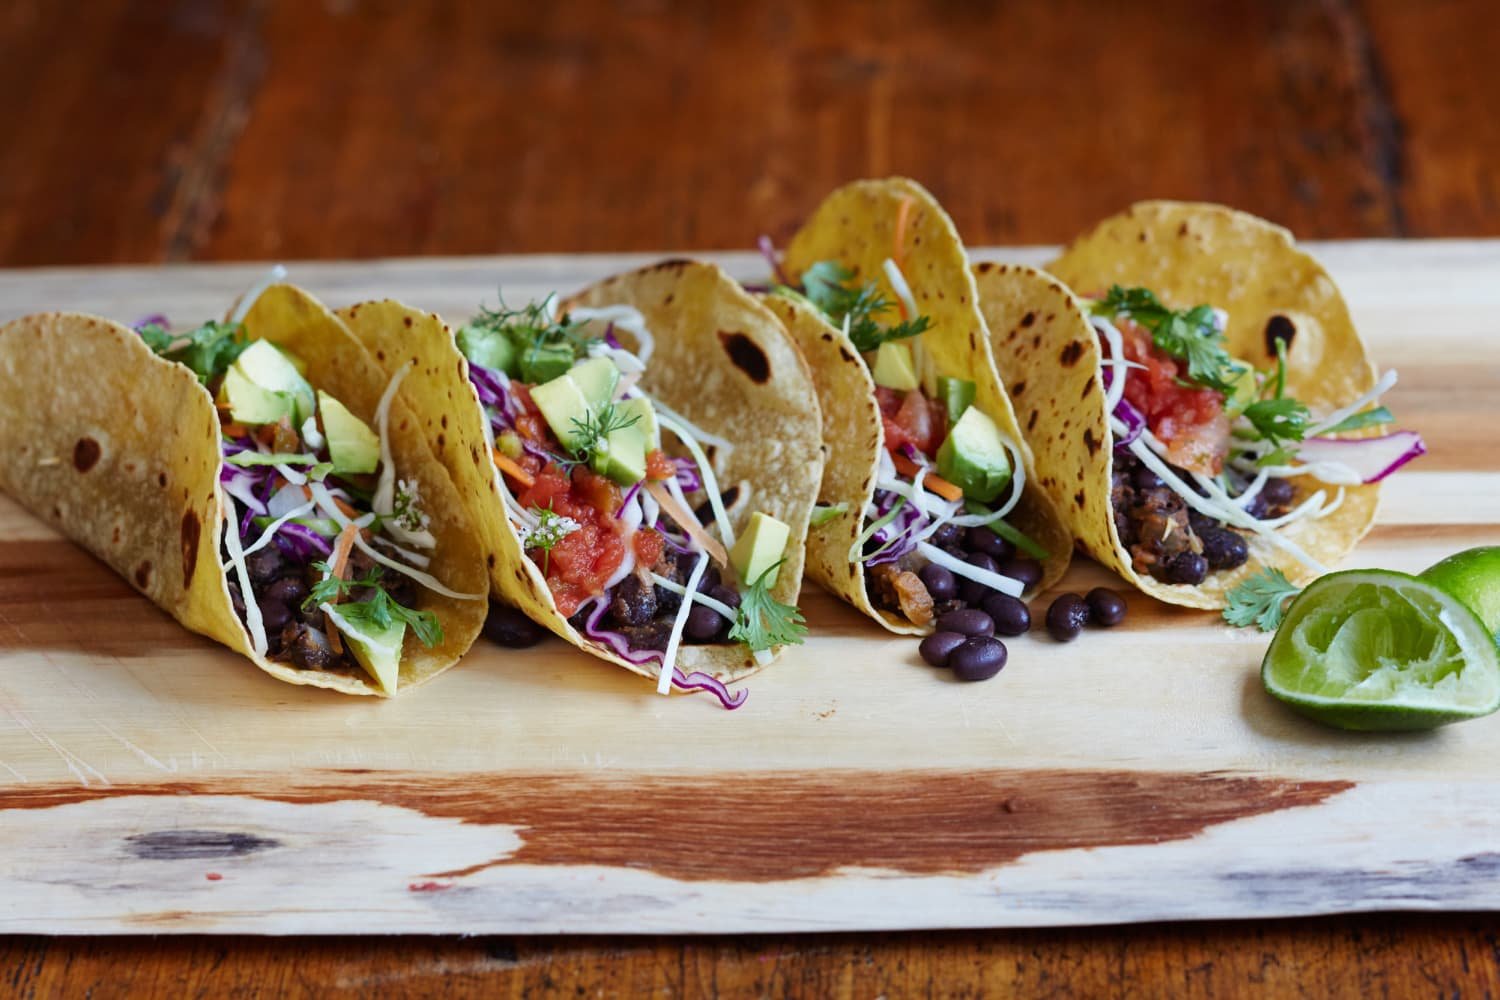 10-Minute Black Bean Tacos Prove Store-Bought Is Perfectly Fine